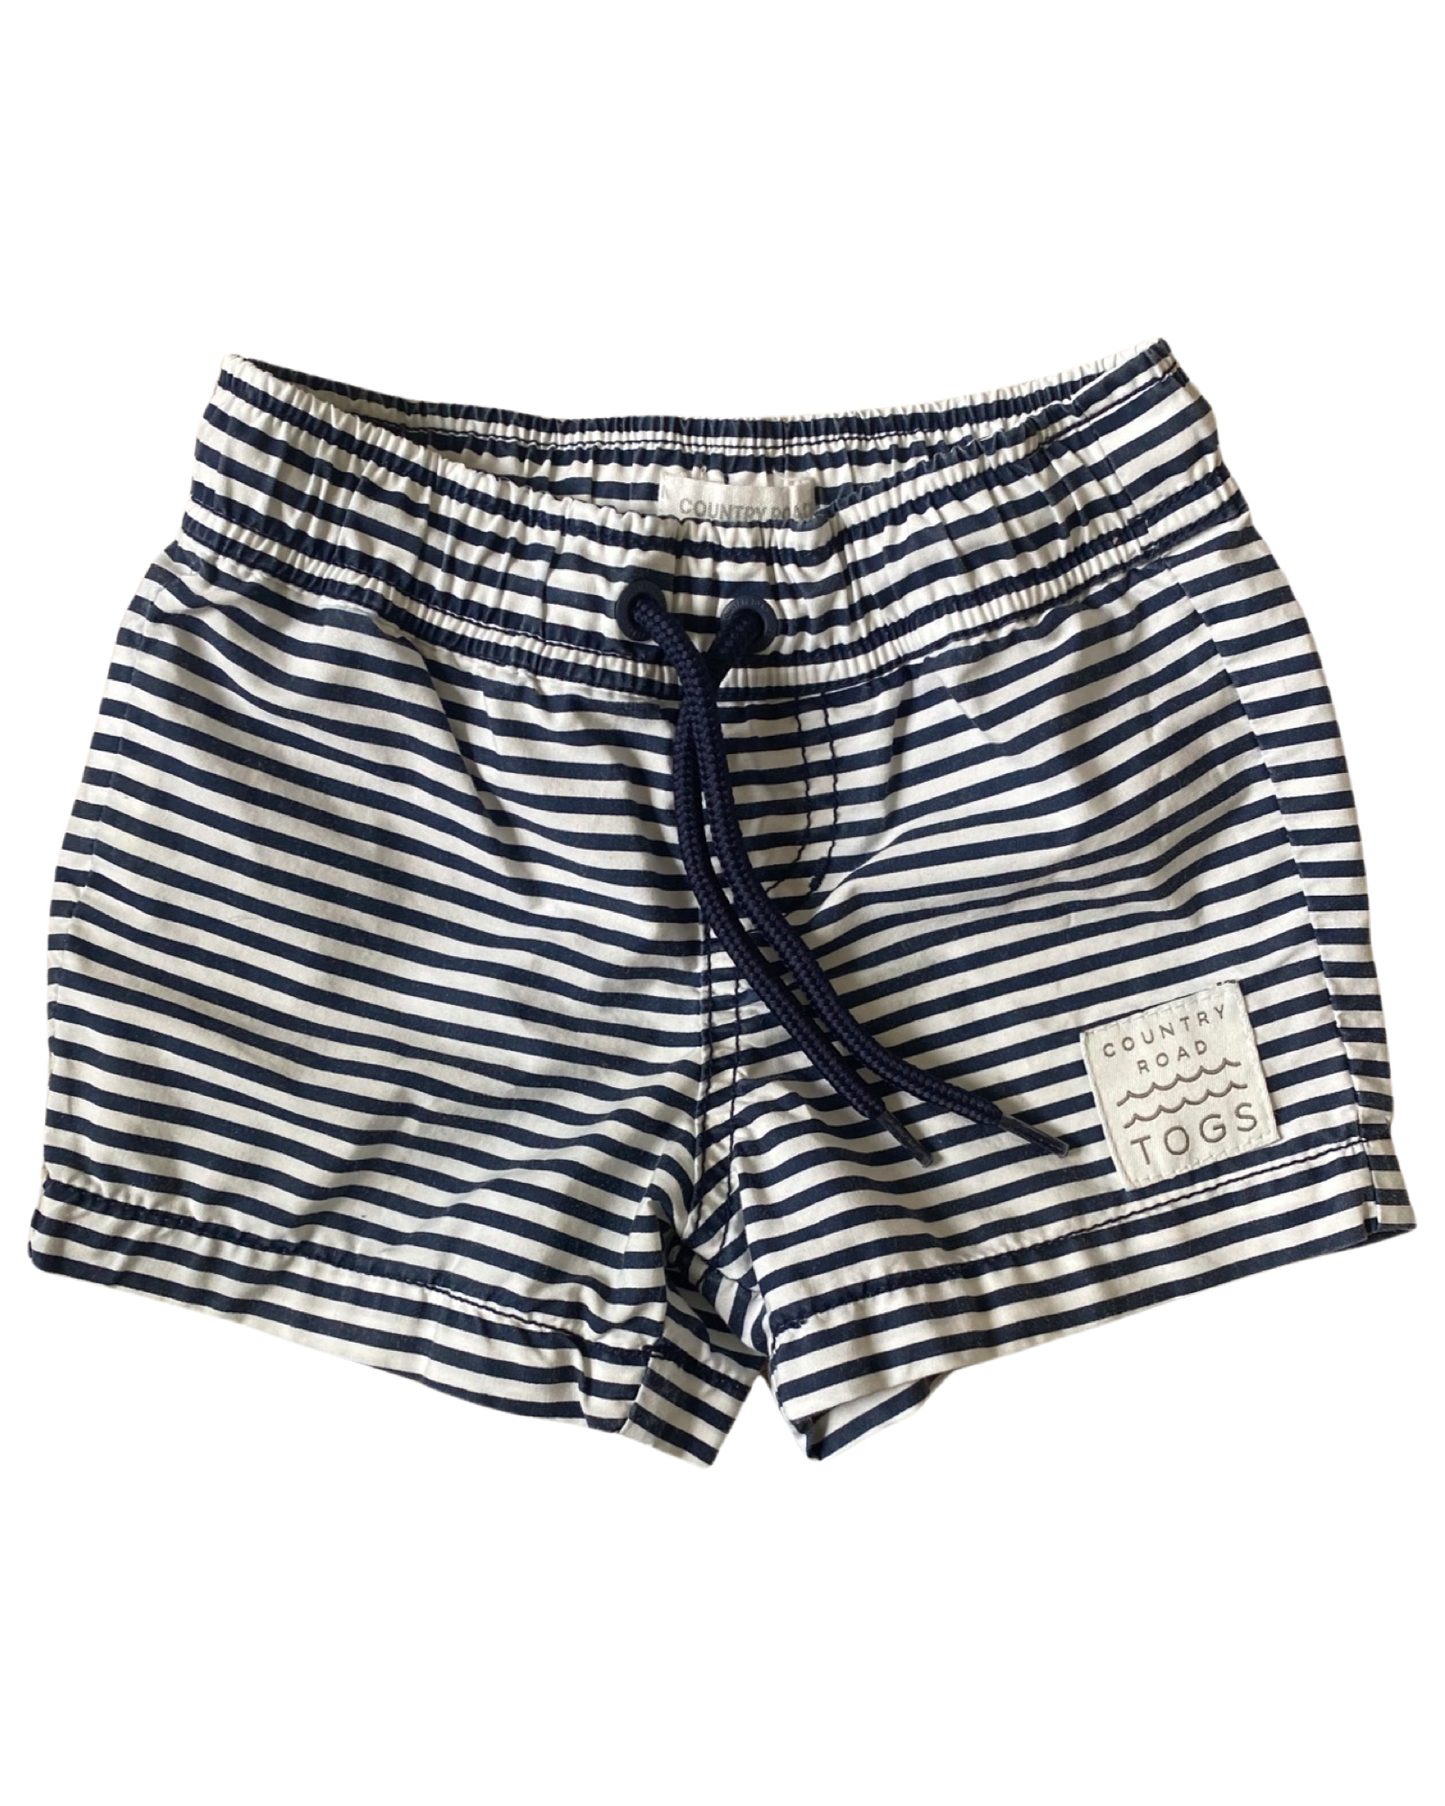 Country Road striped swim trunks (size 3-6mths)